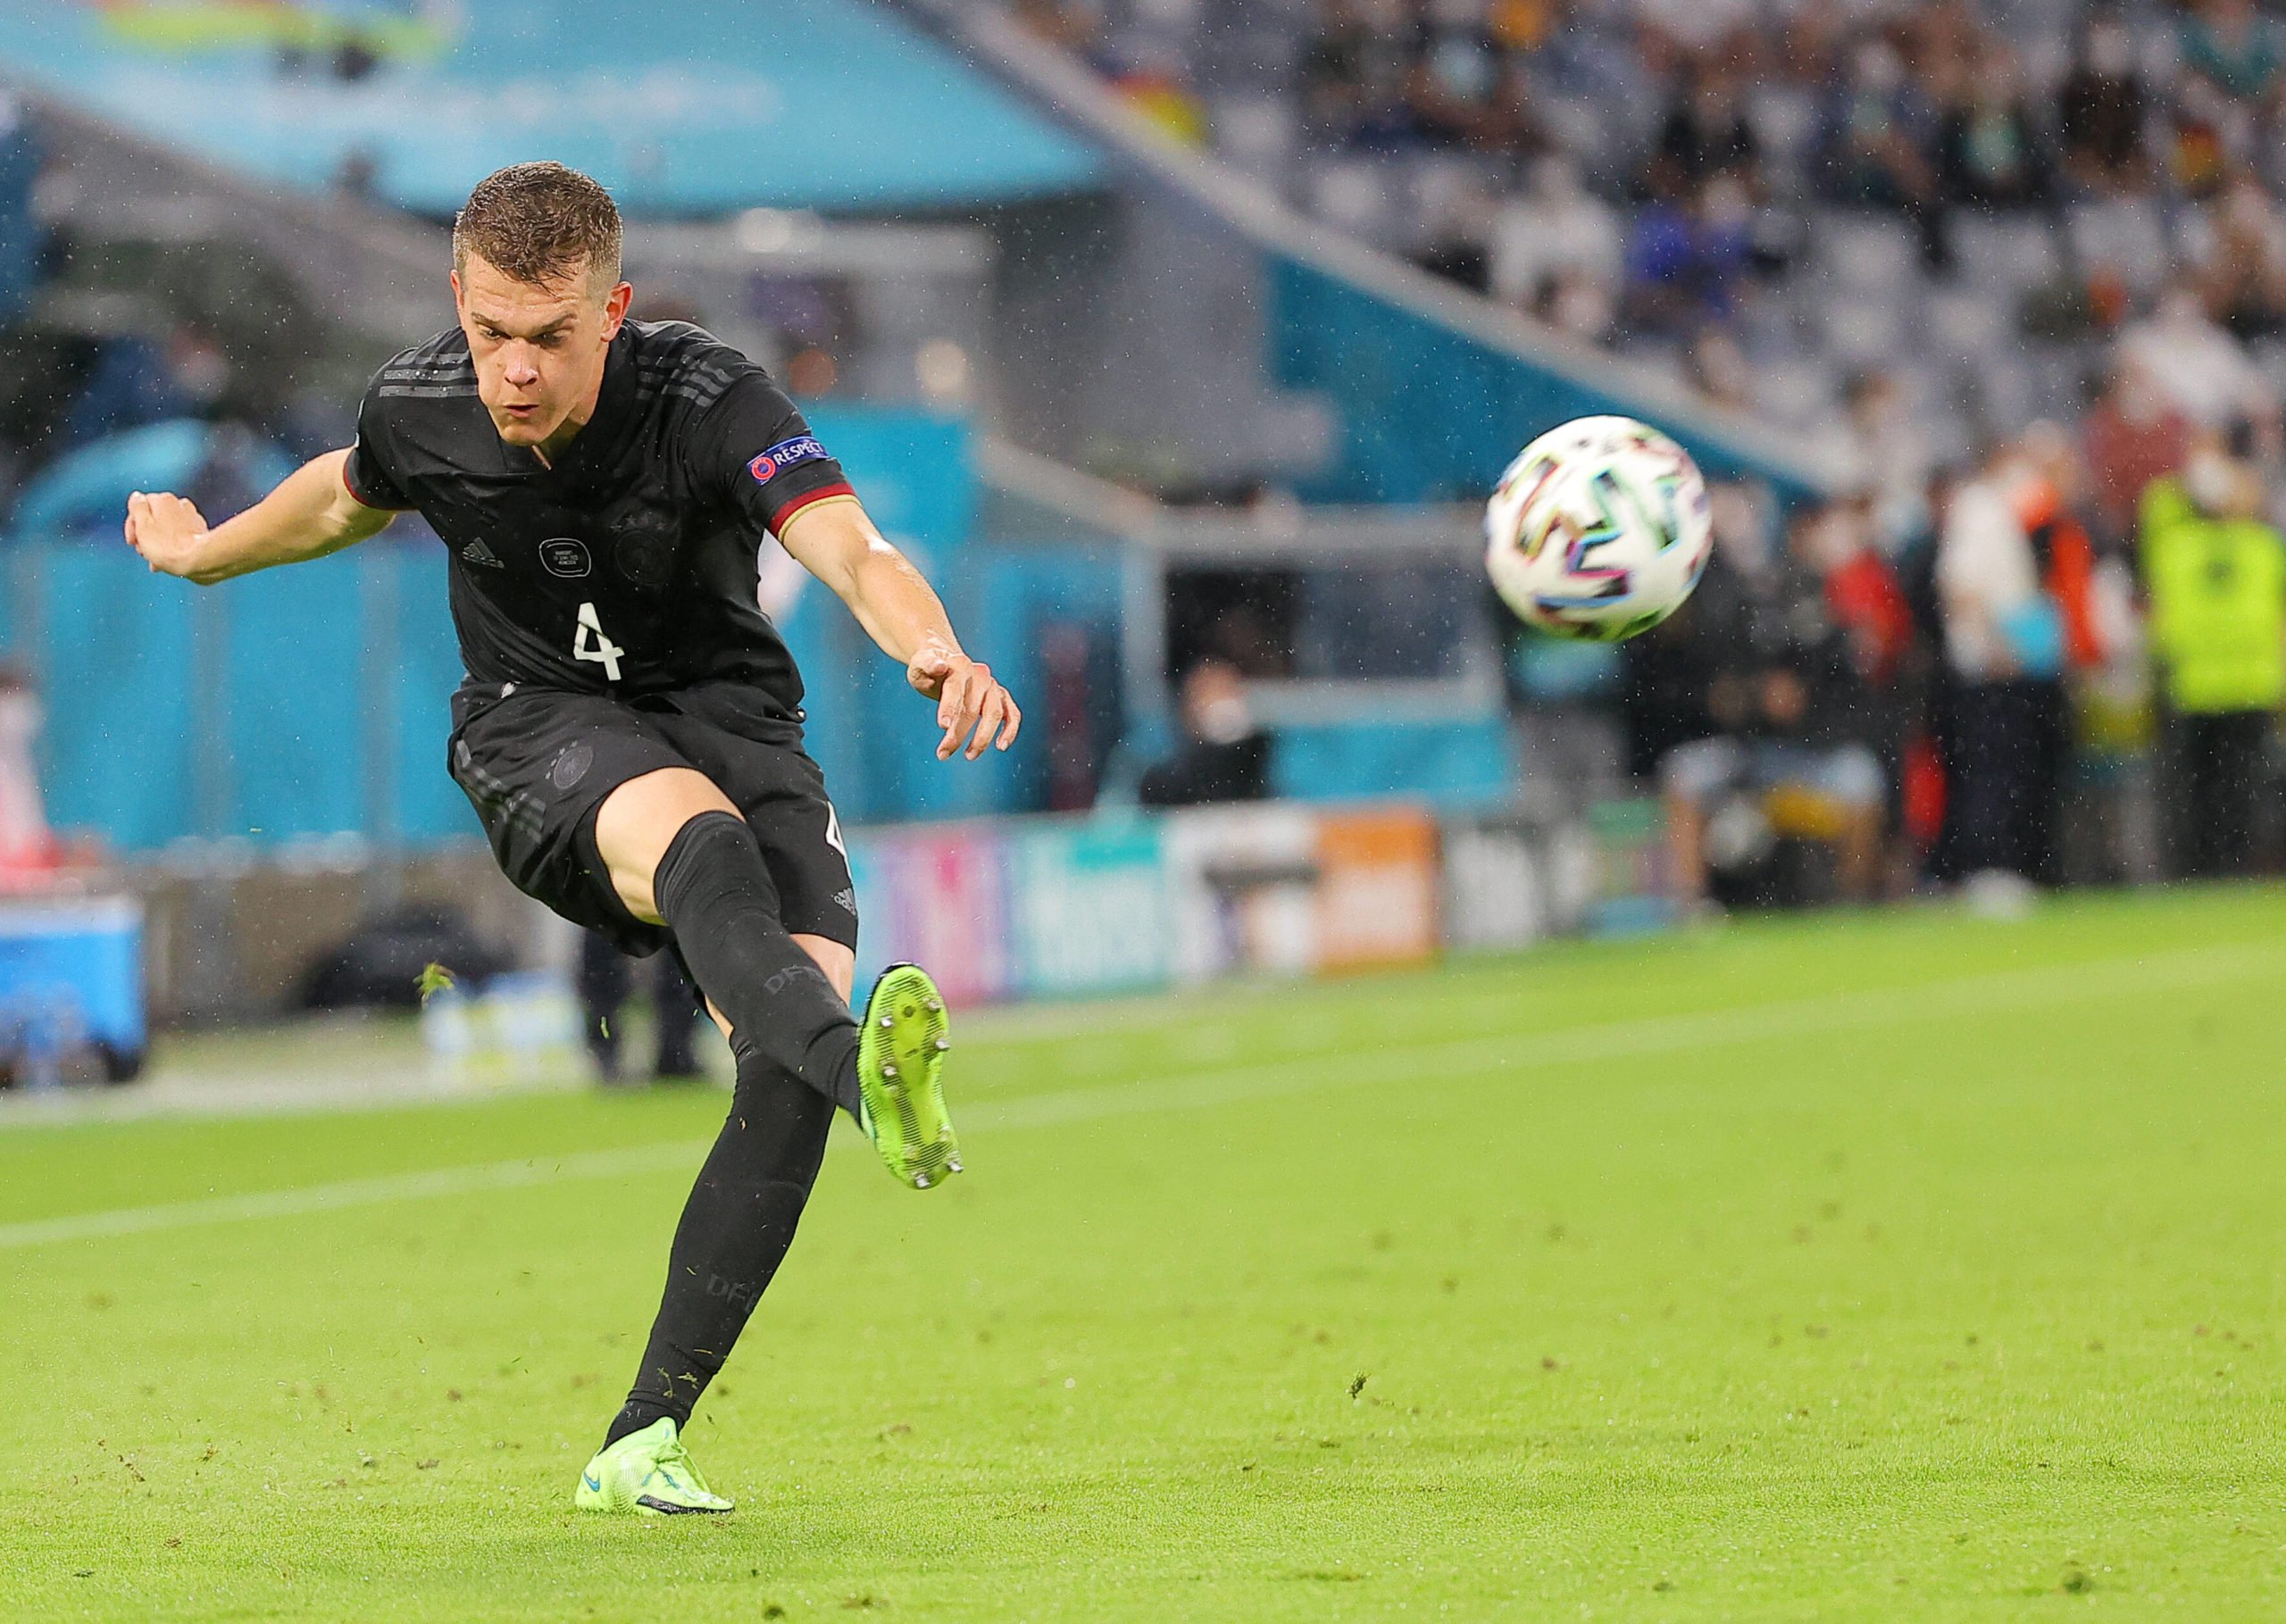 Real Madrid locked in a three-way battle for Ginter who is seen in the photo